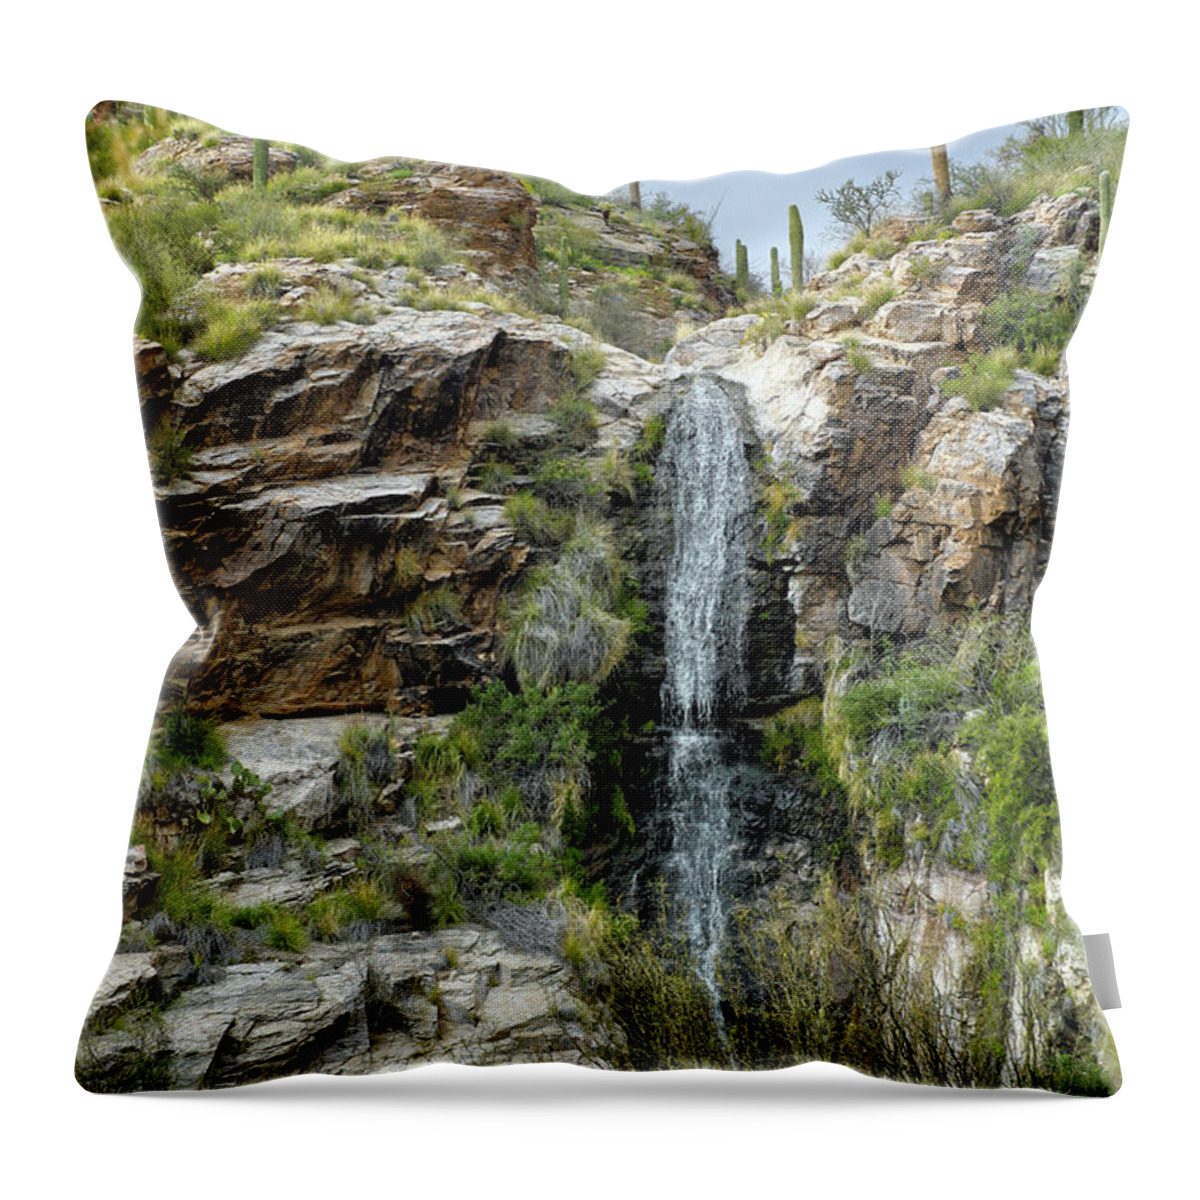 Ventana Canyon Throw Pillow featuring the photograph Desert Waterfall by Mitch Cat